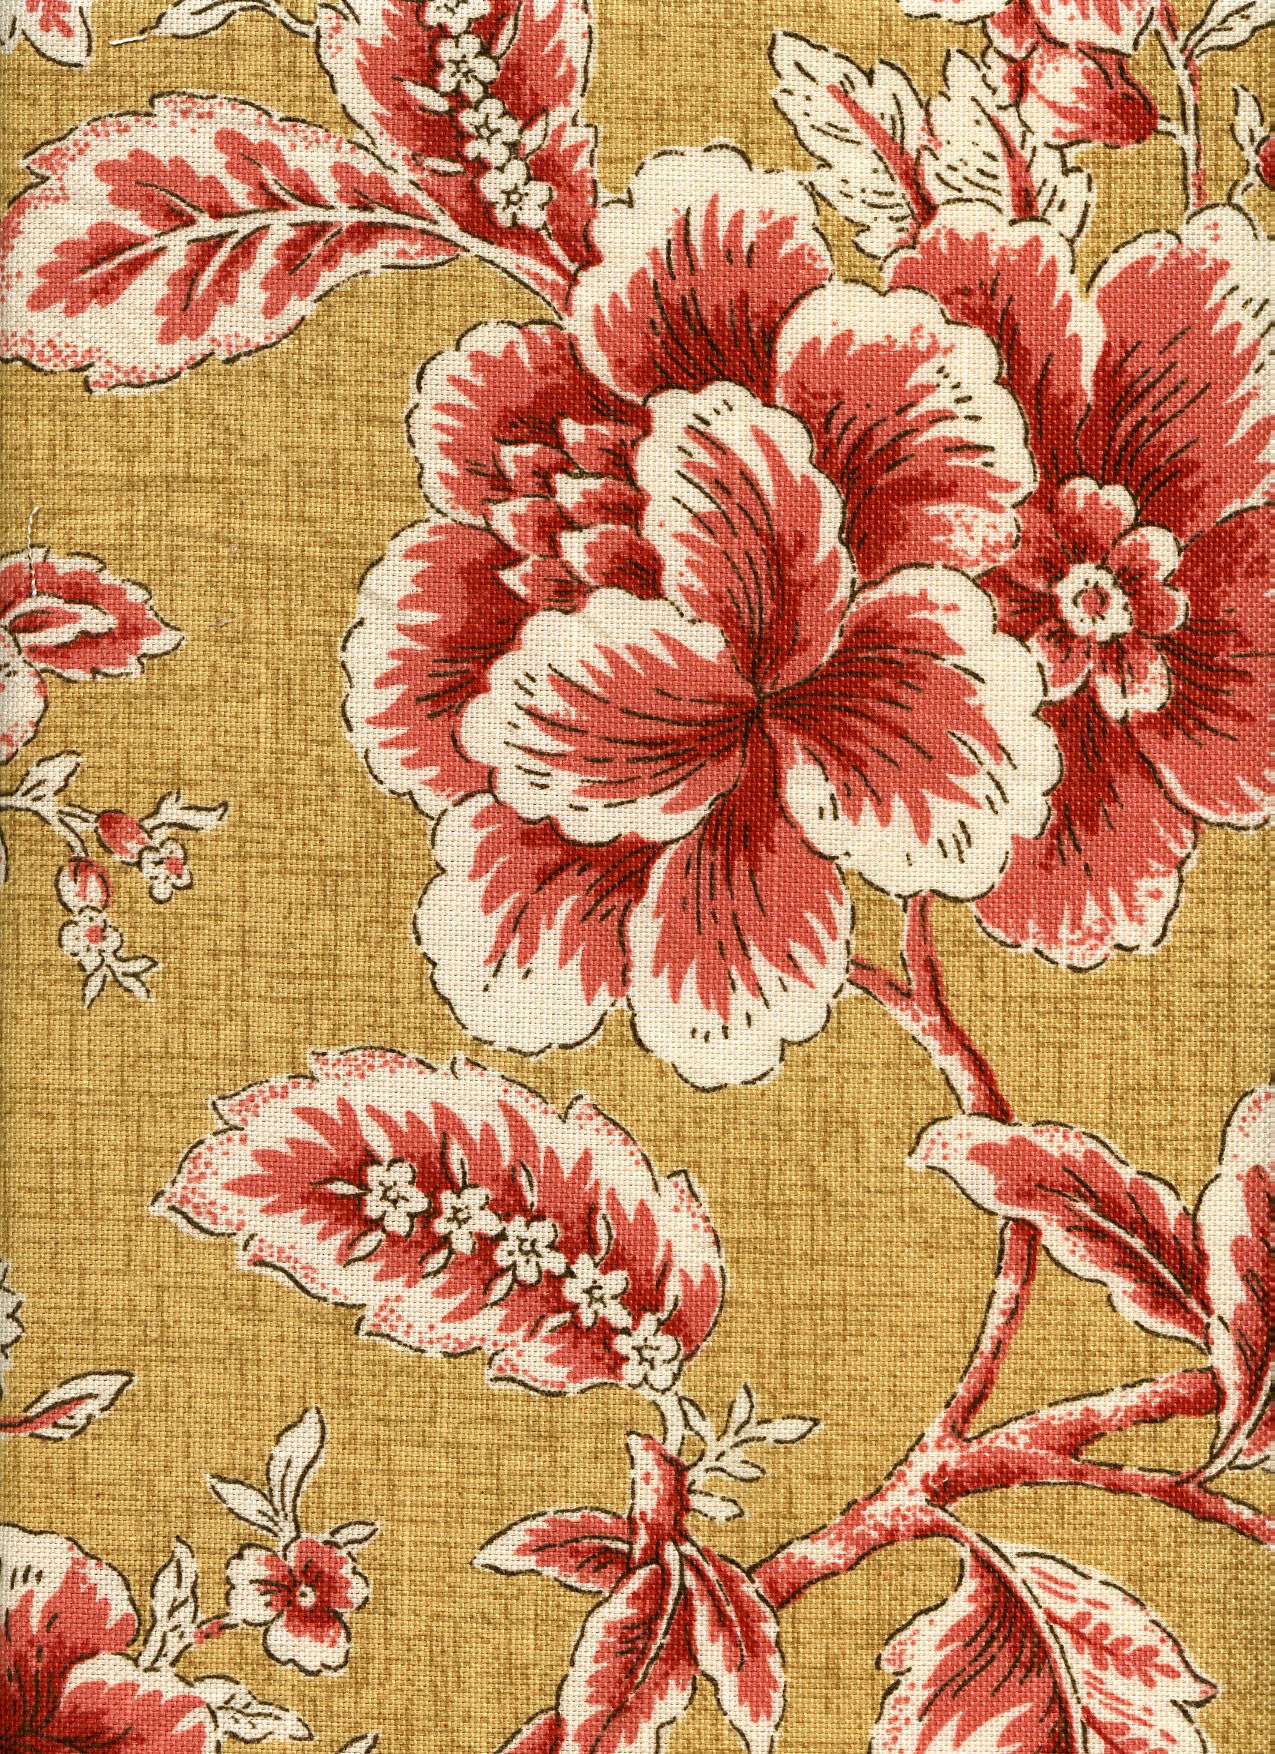 Braemore Floral in Yellow Gold, Terracotta, & Creme